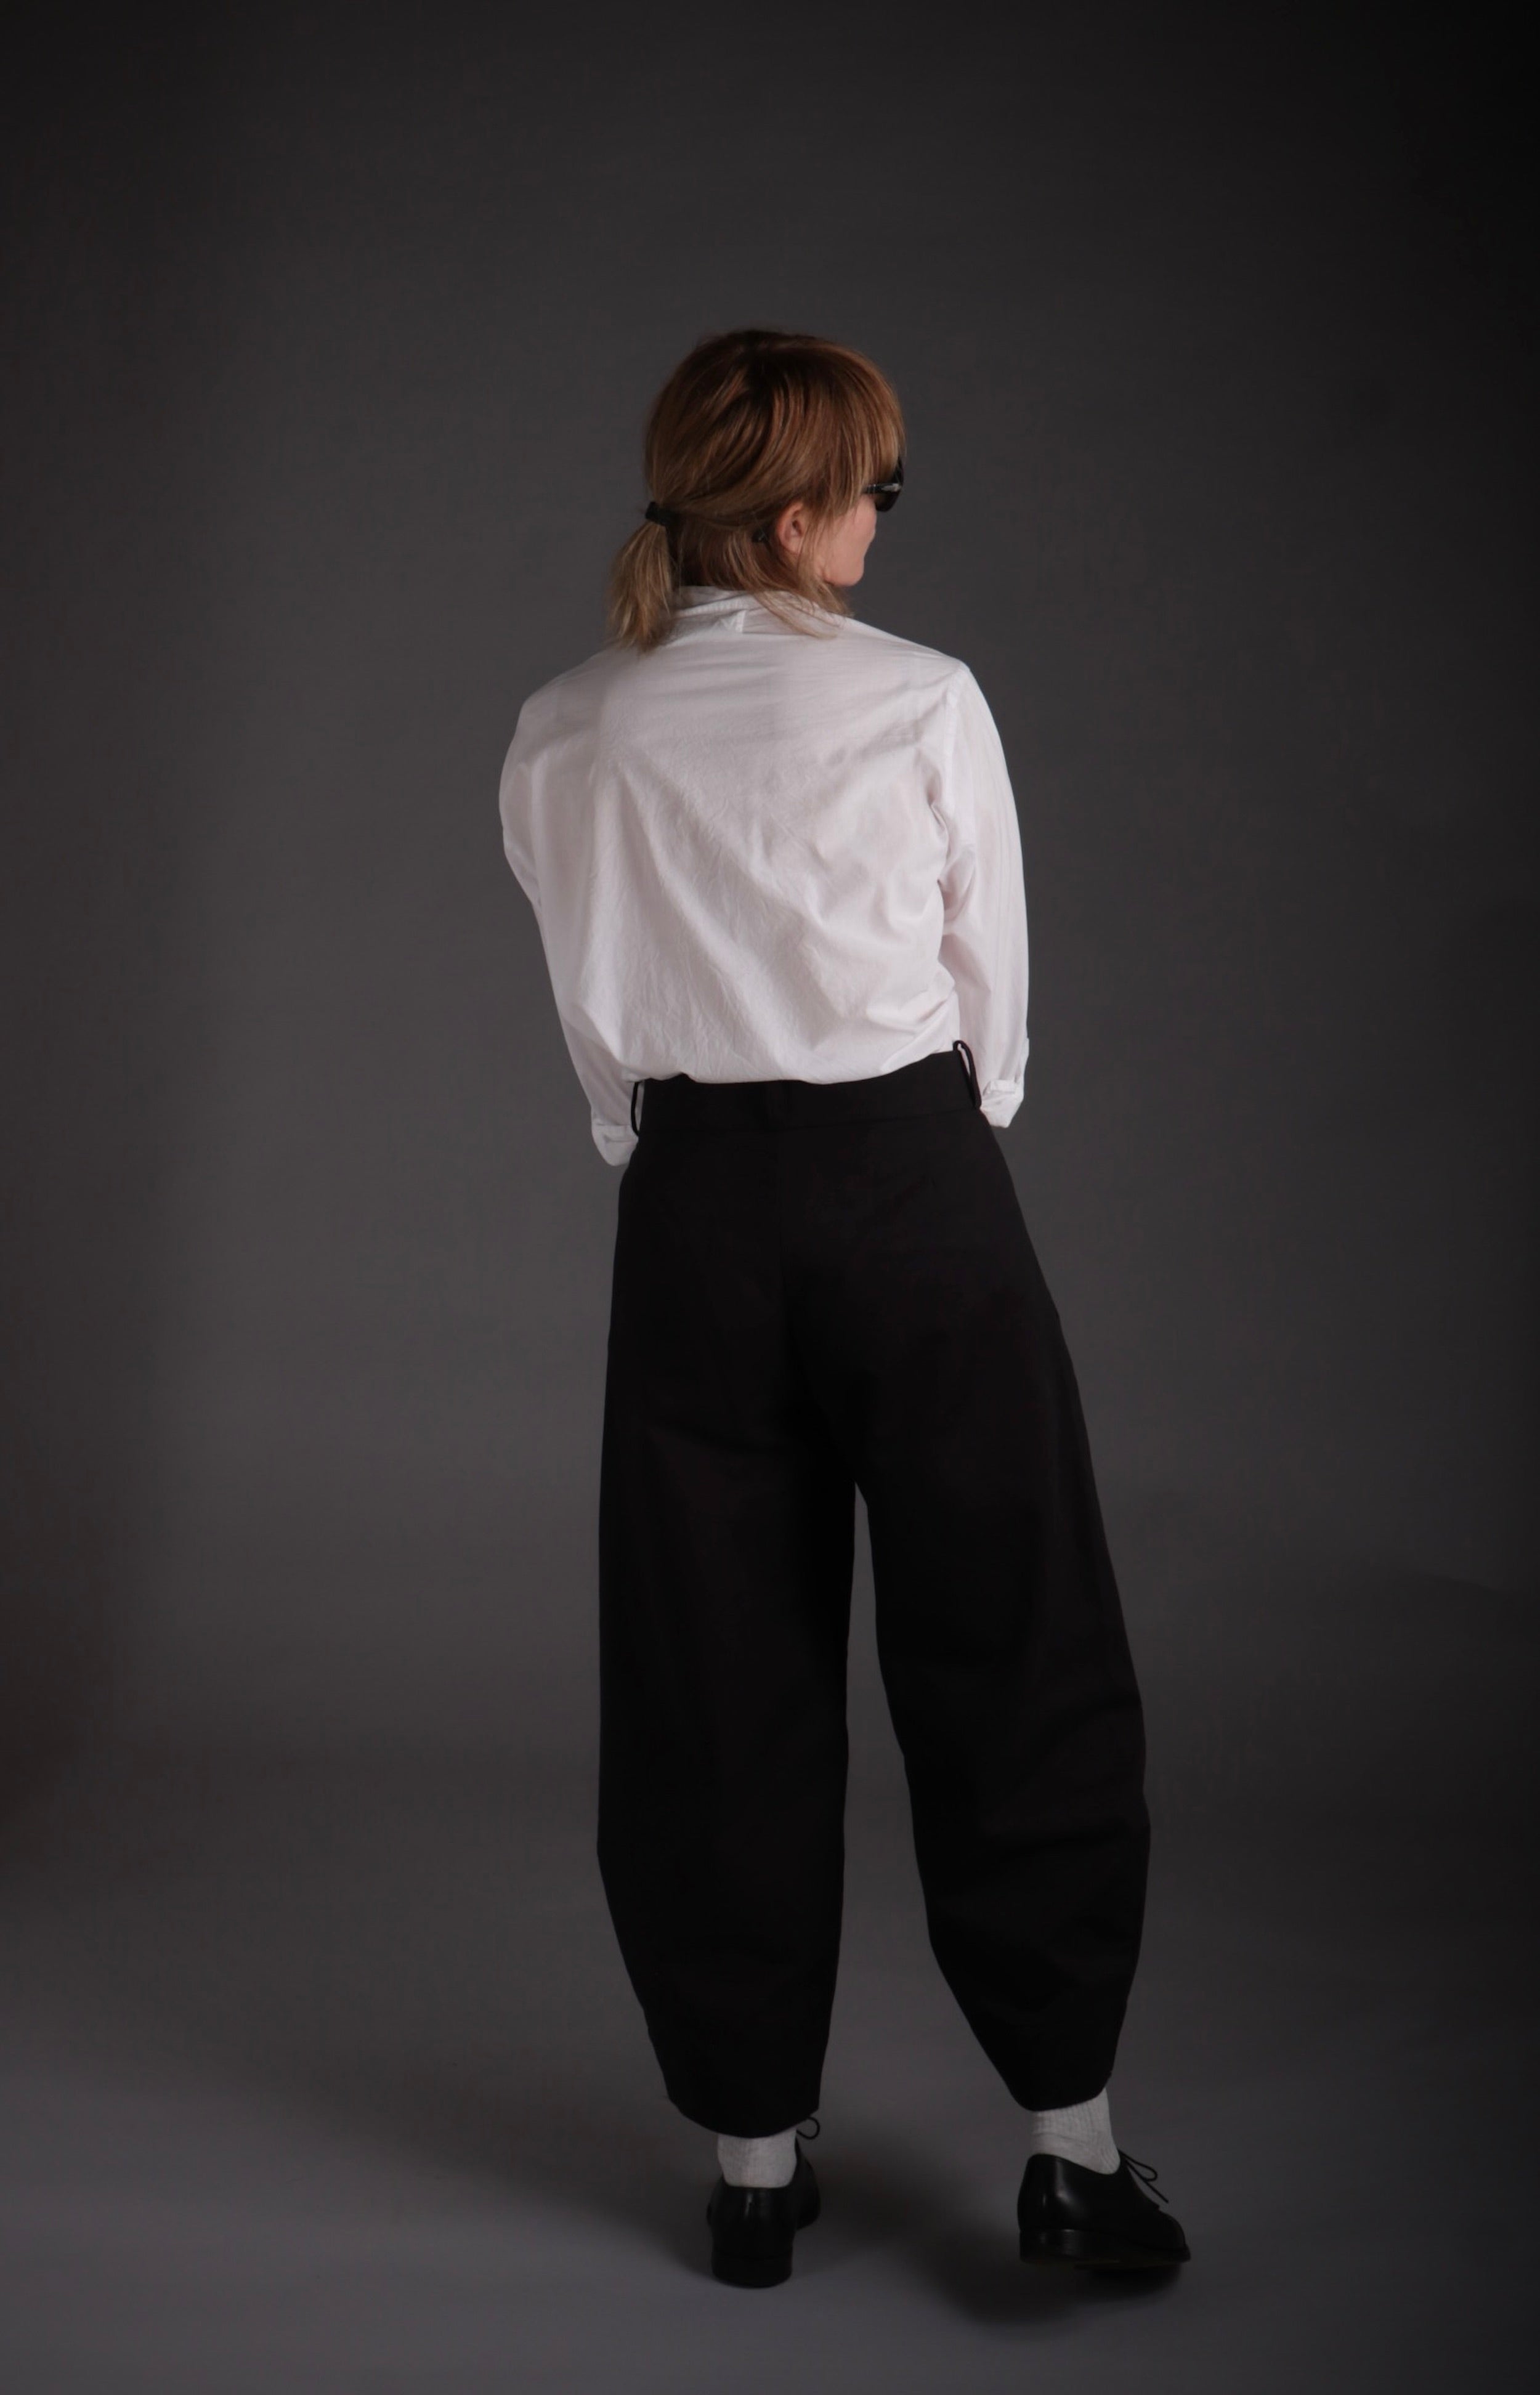 Sienna wears Carrier Company Dutch Trousers in Black Cotton Drill with Lightweight Collarless Shirt